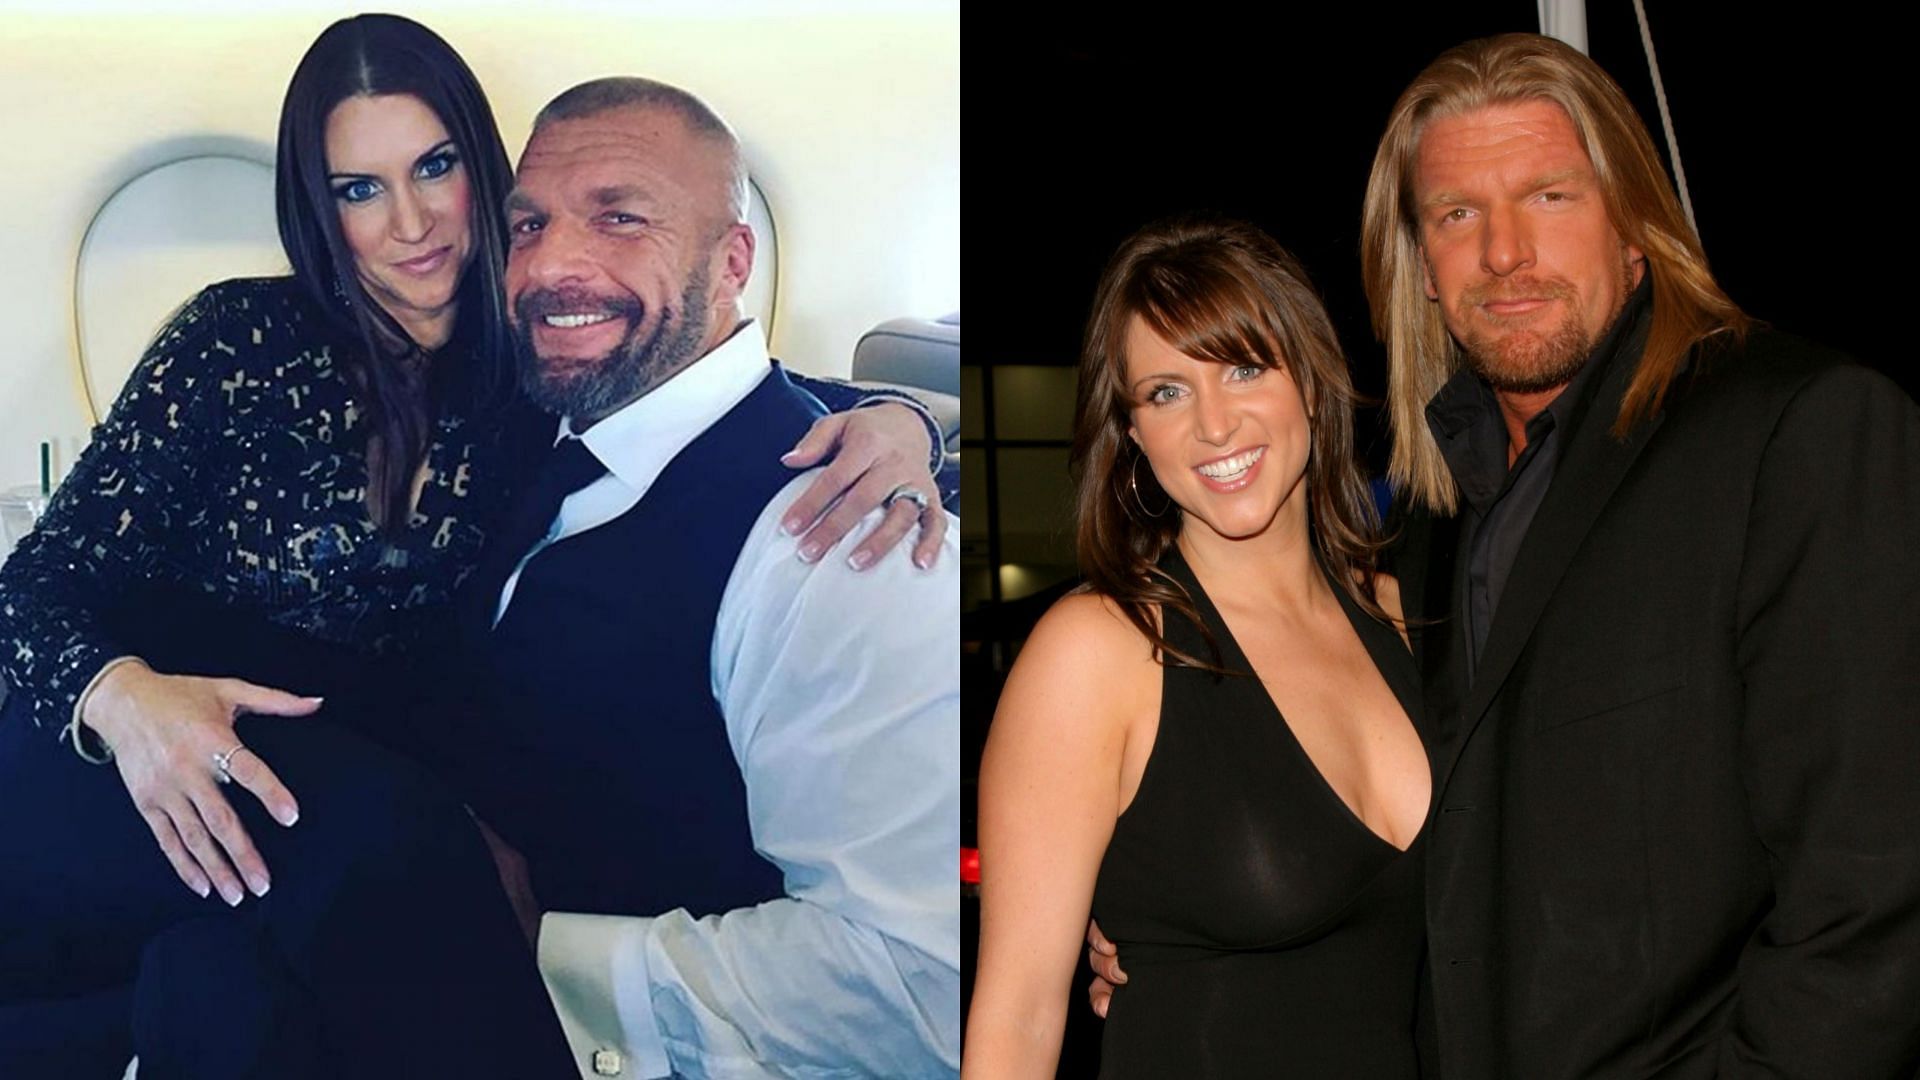 Triple H Making the Game: Triple H's Approach to a Better Body (WWE)